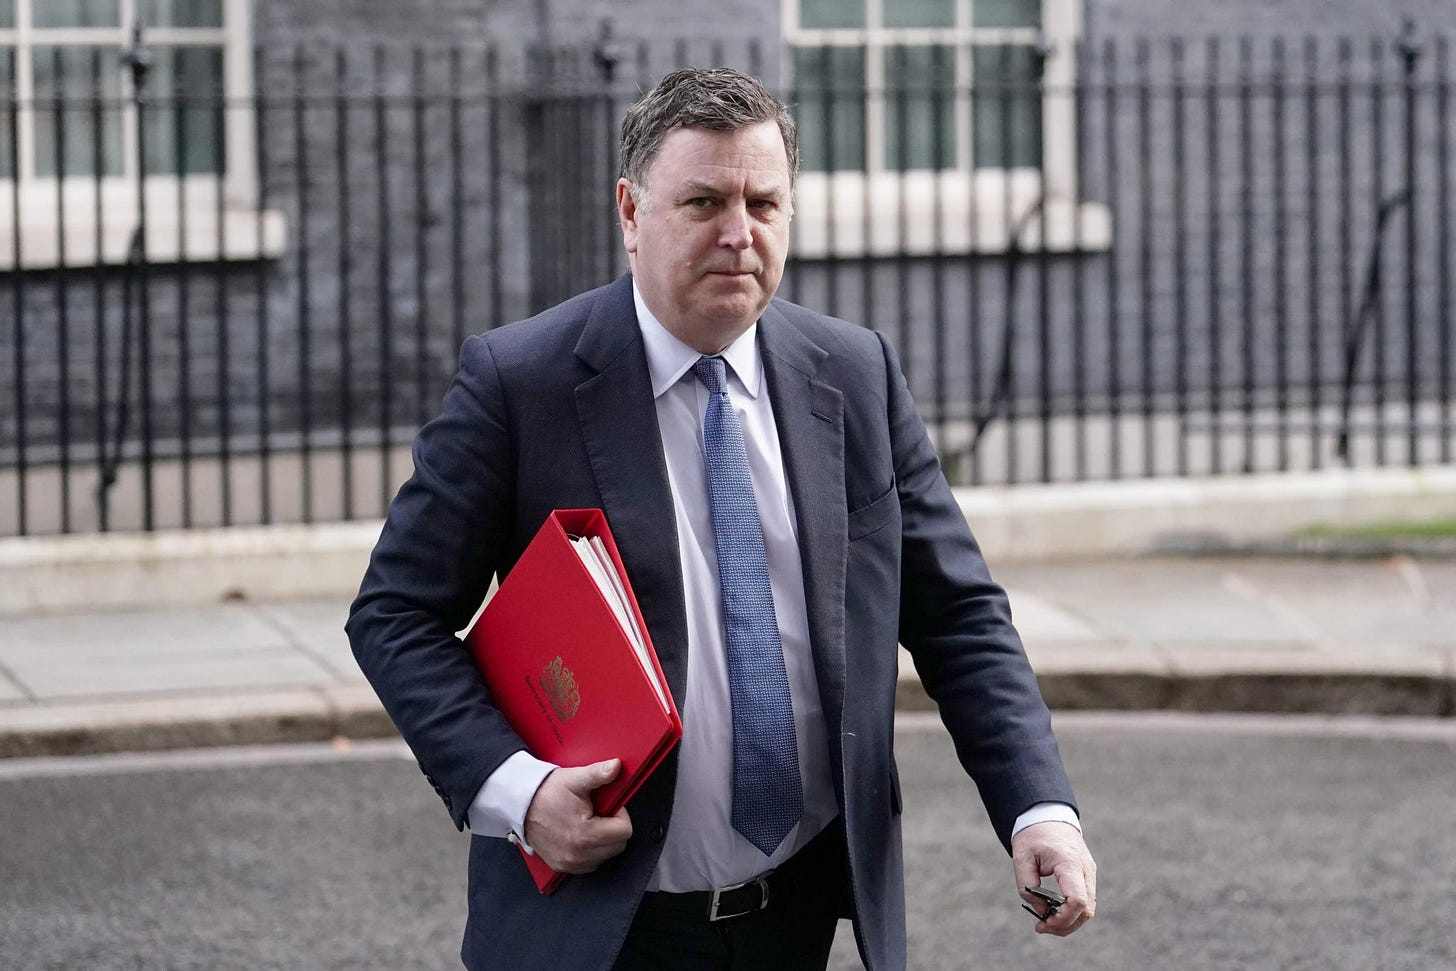 The Work and Pensions secretary Mel Stride is pictured carrying a red book and looking glum